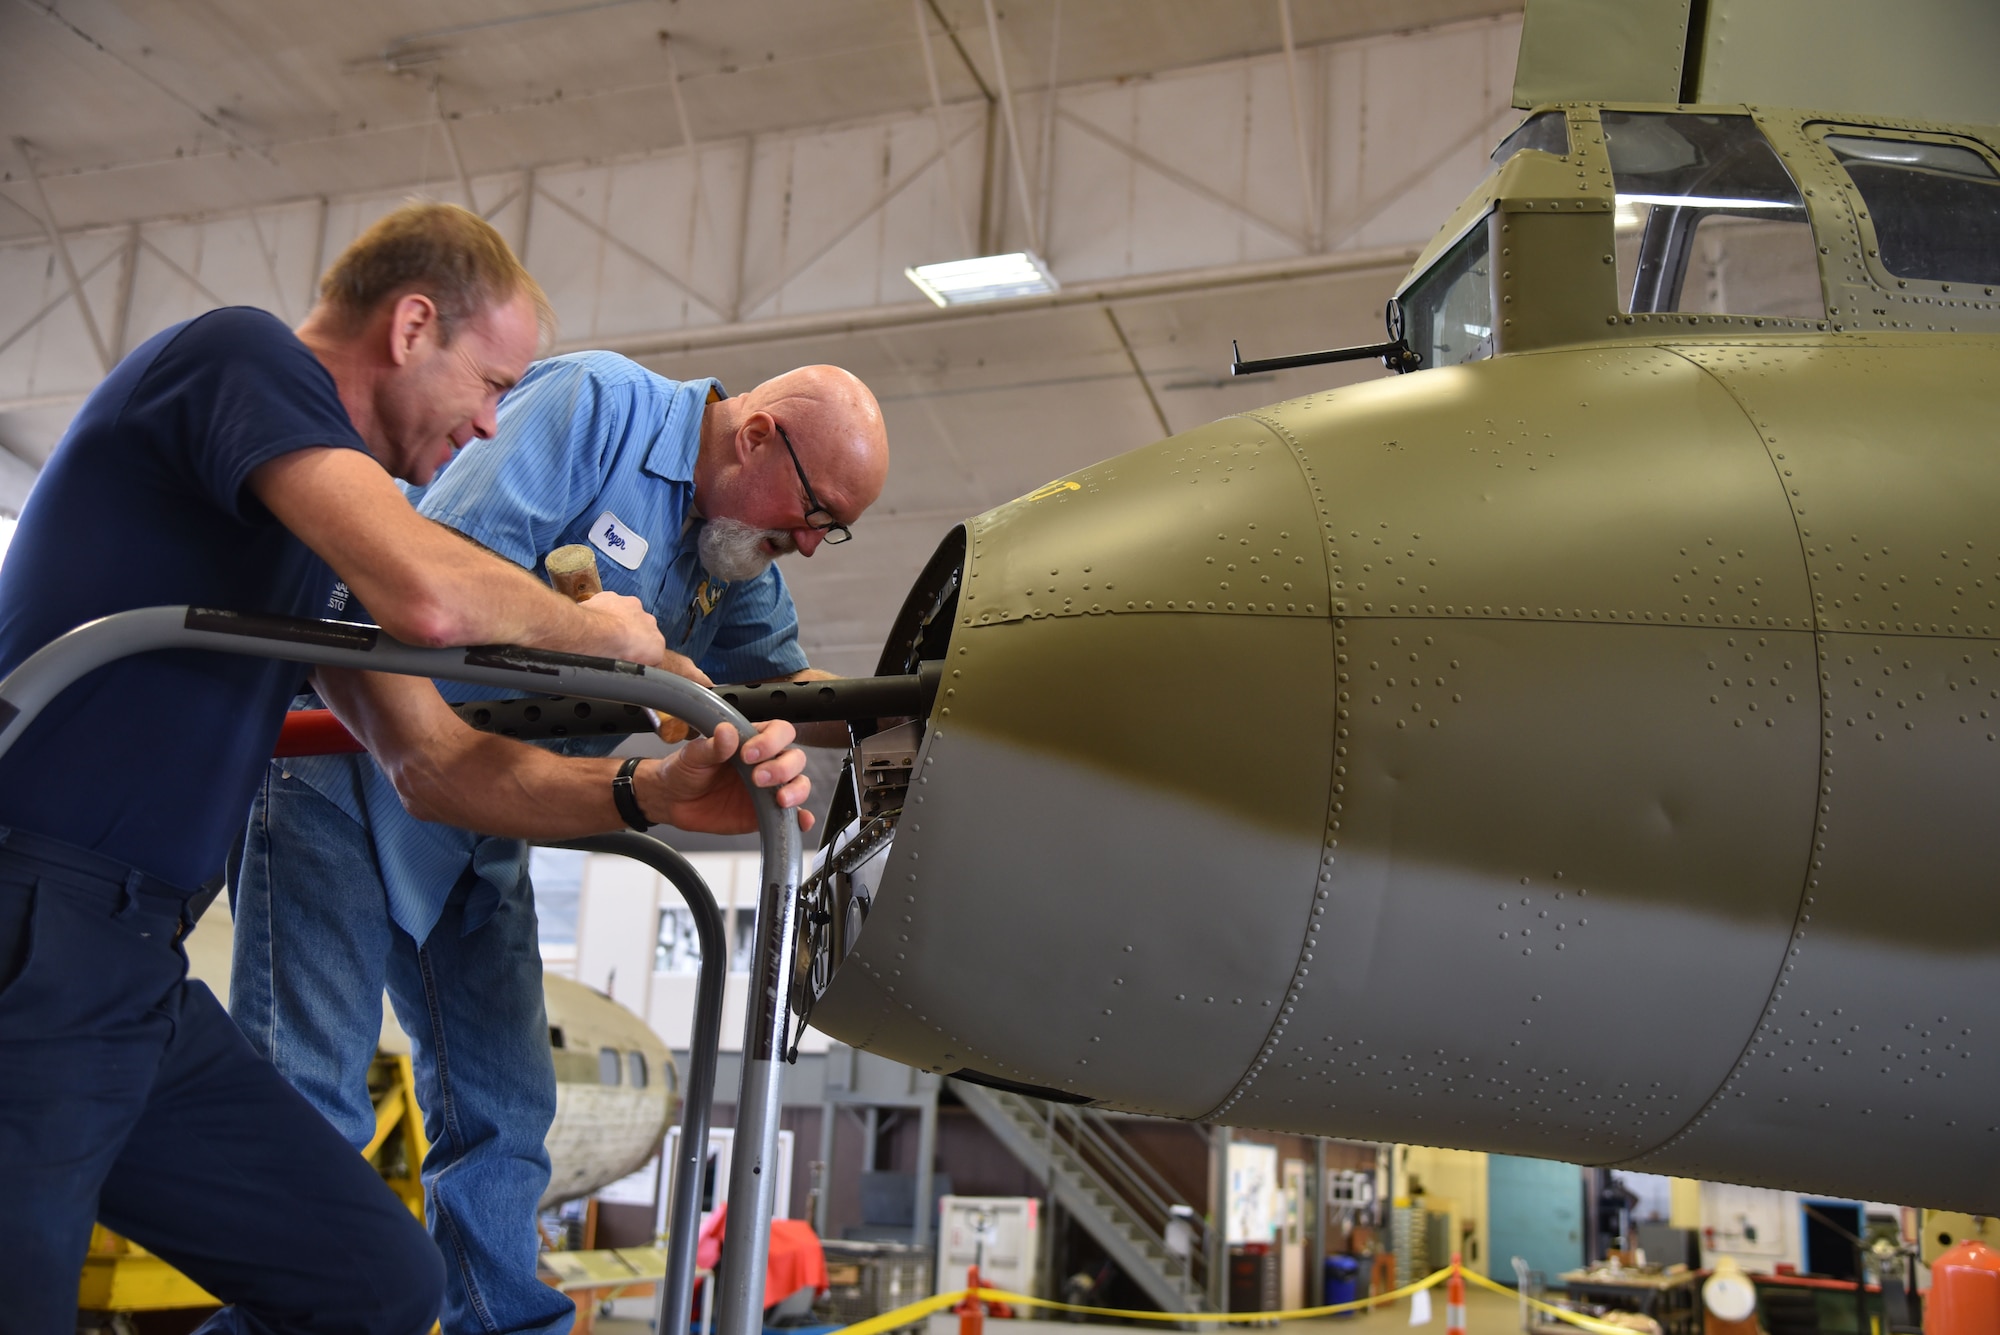 (01/30/2018) -- National Museum of the U.S. Air Force restoration crews installing tail guns on the Boeing B-17F Memphis Belle. Plans call for the aircraft to be placed on permanent public display in the WWII Gallery here at the National Museum of the U.S. Air Force on May 17, 2018. (U.S. Air Force photo by Ken LaRock)